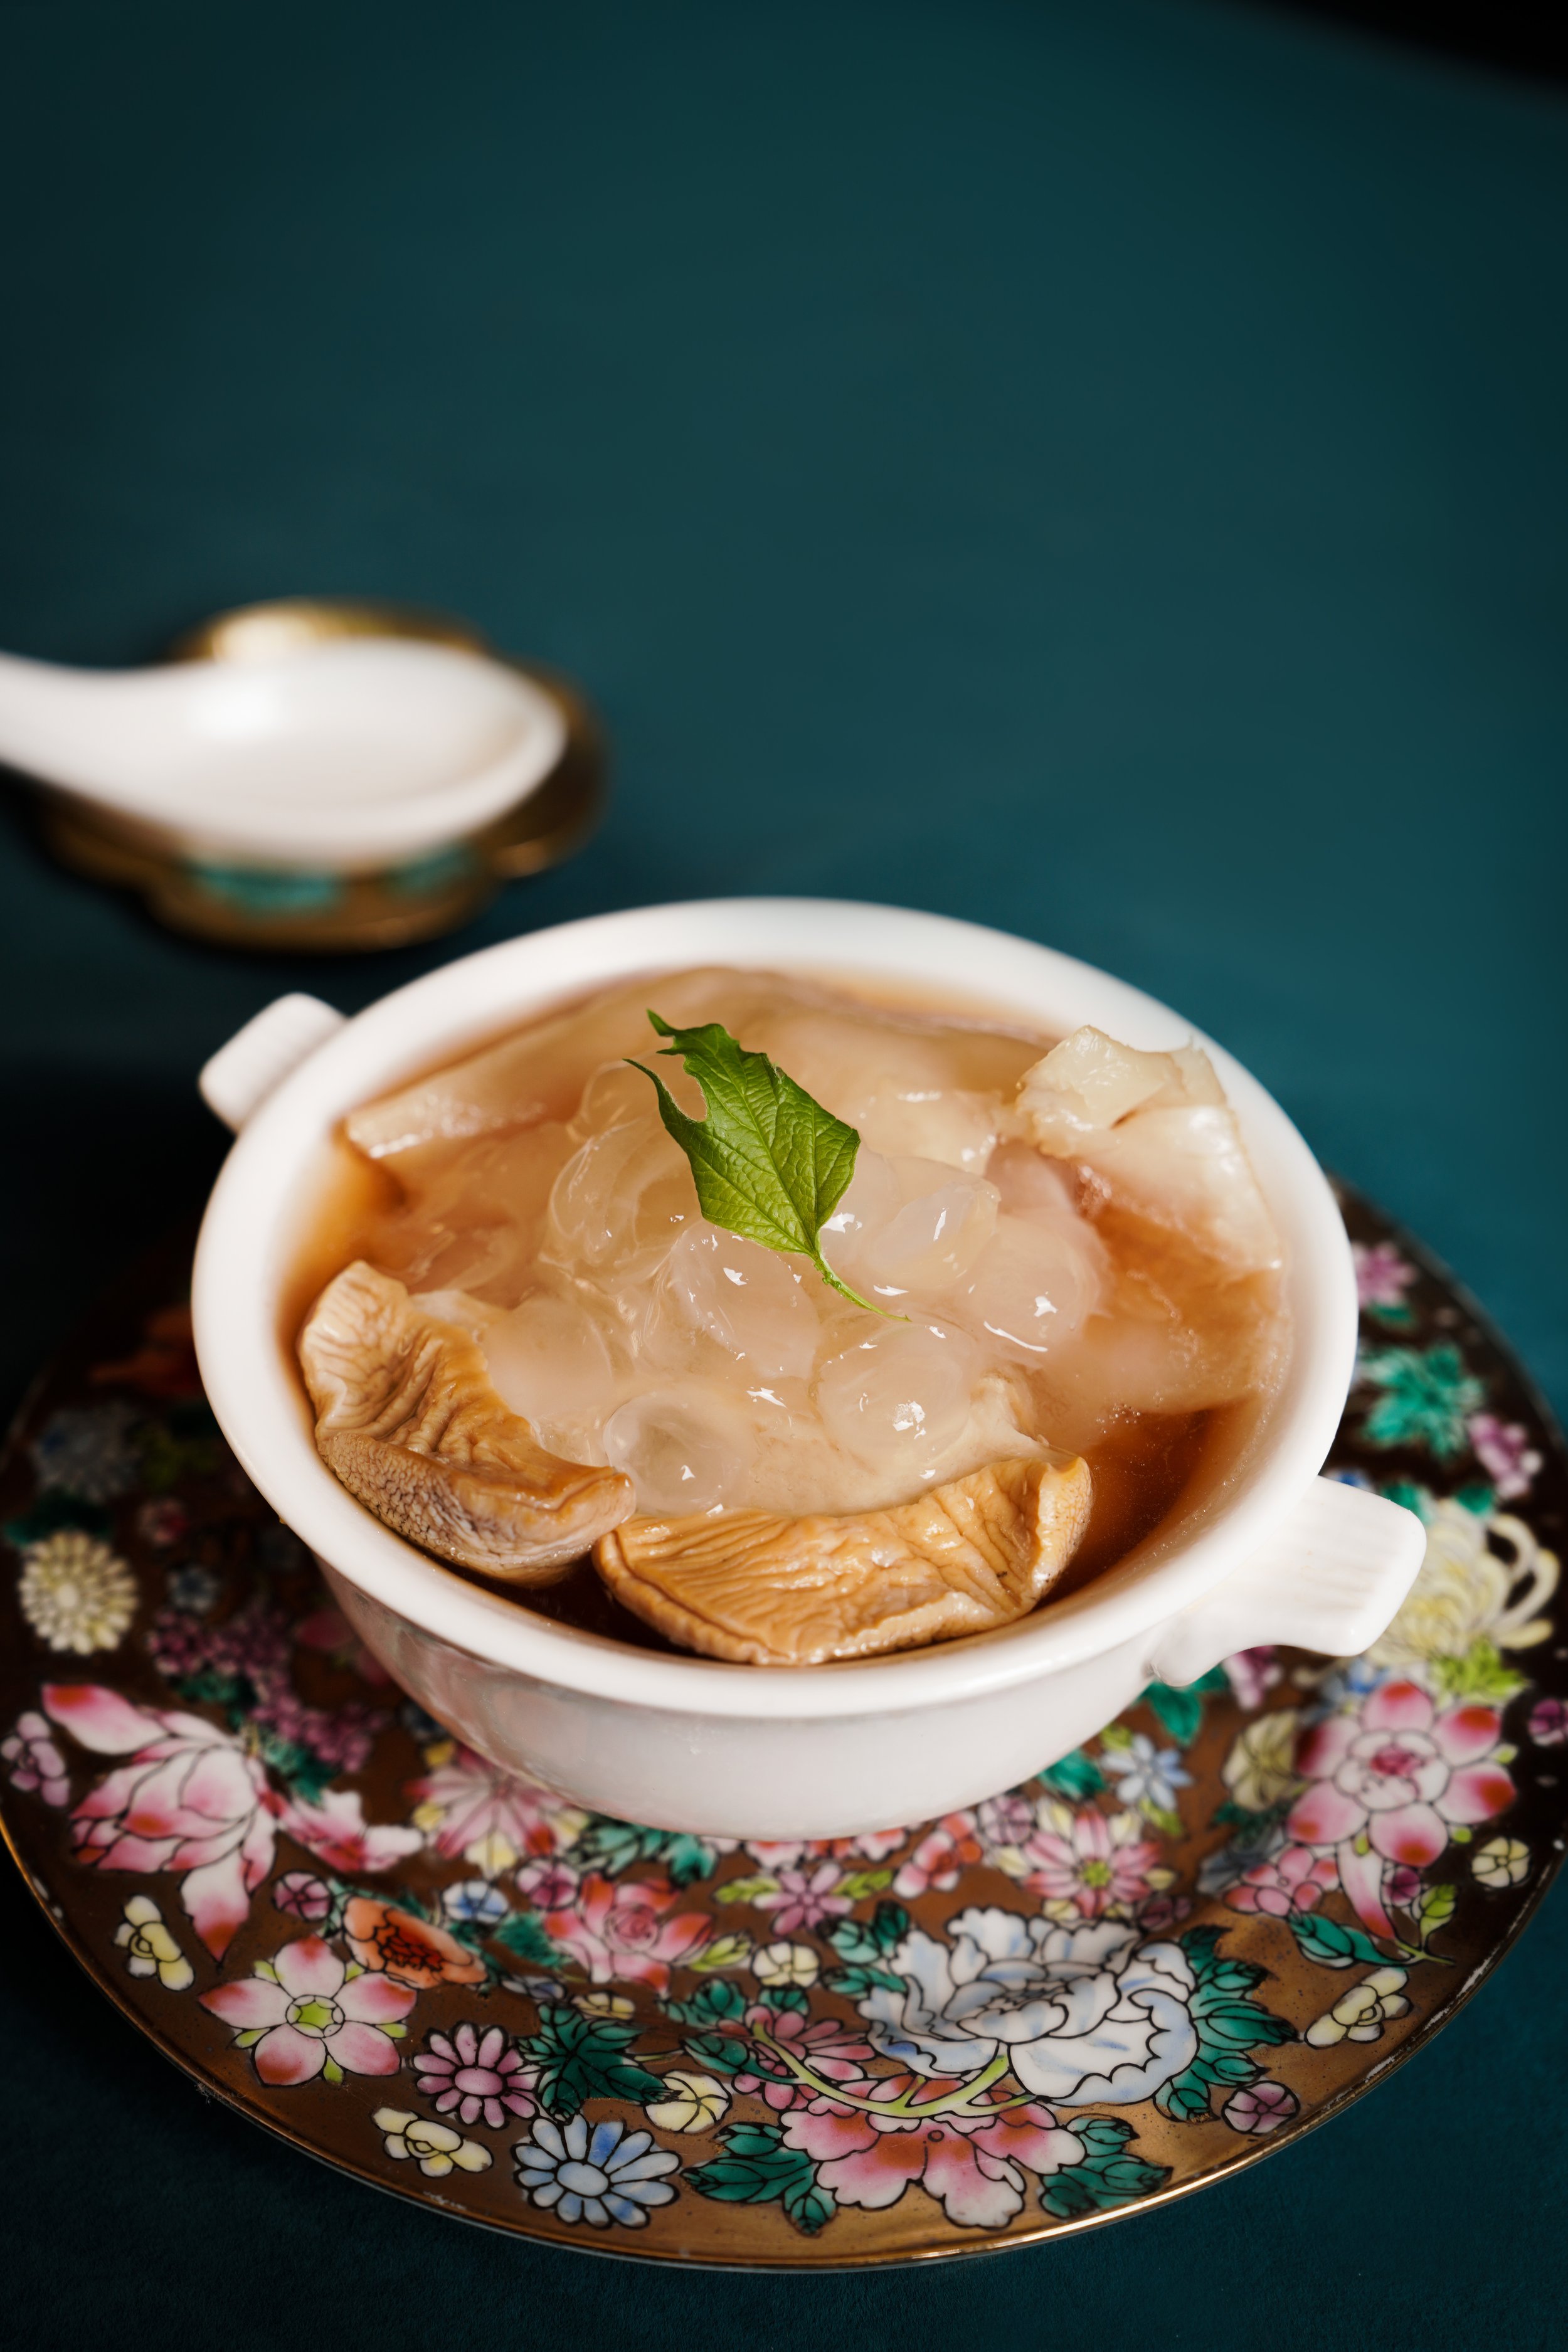 Double-boiled Snow Lotus Soup with Fish Maw and Sea Whelk 花膠響螺燉天山雪蓮.jpg